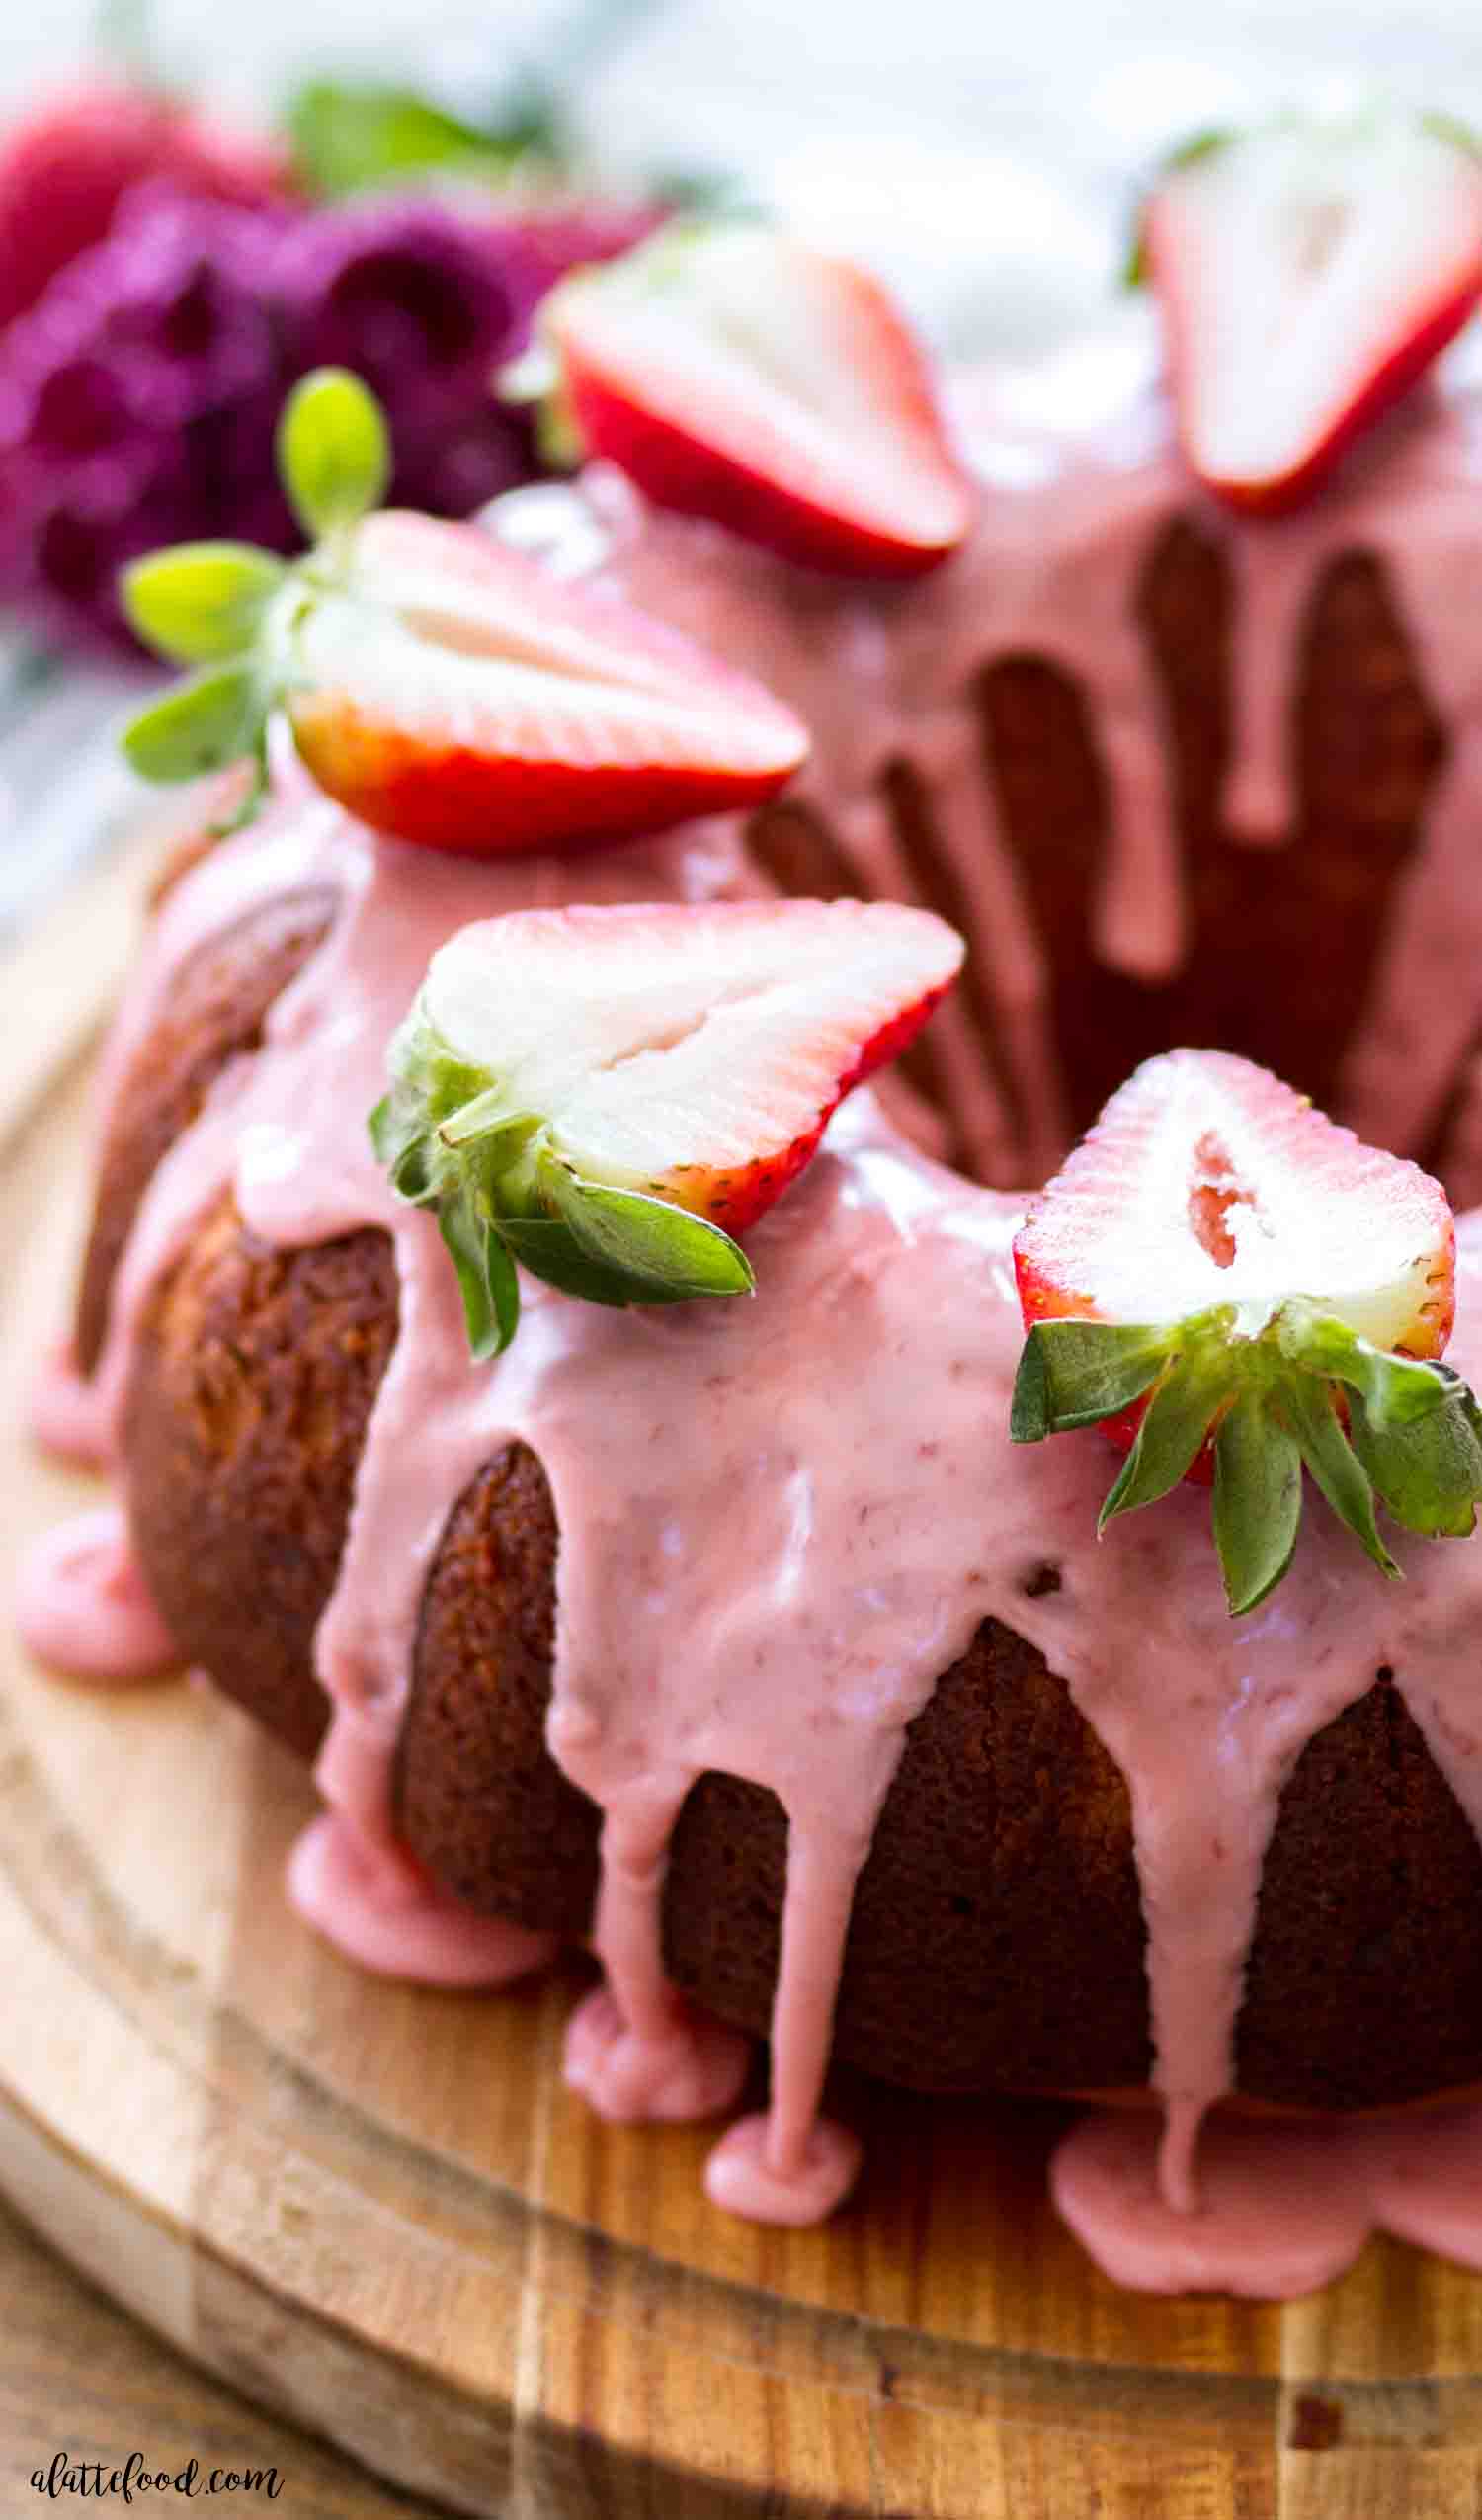 Chocolate Buttermilk Bundt Cake - Rich & Tender - That Skinny Chick Can Bake